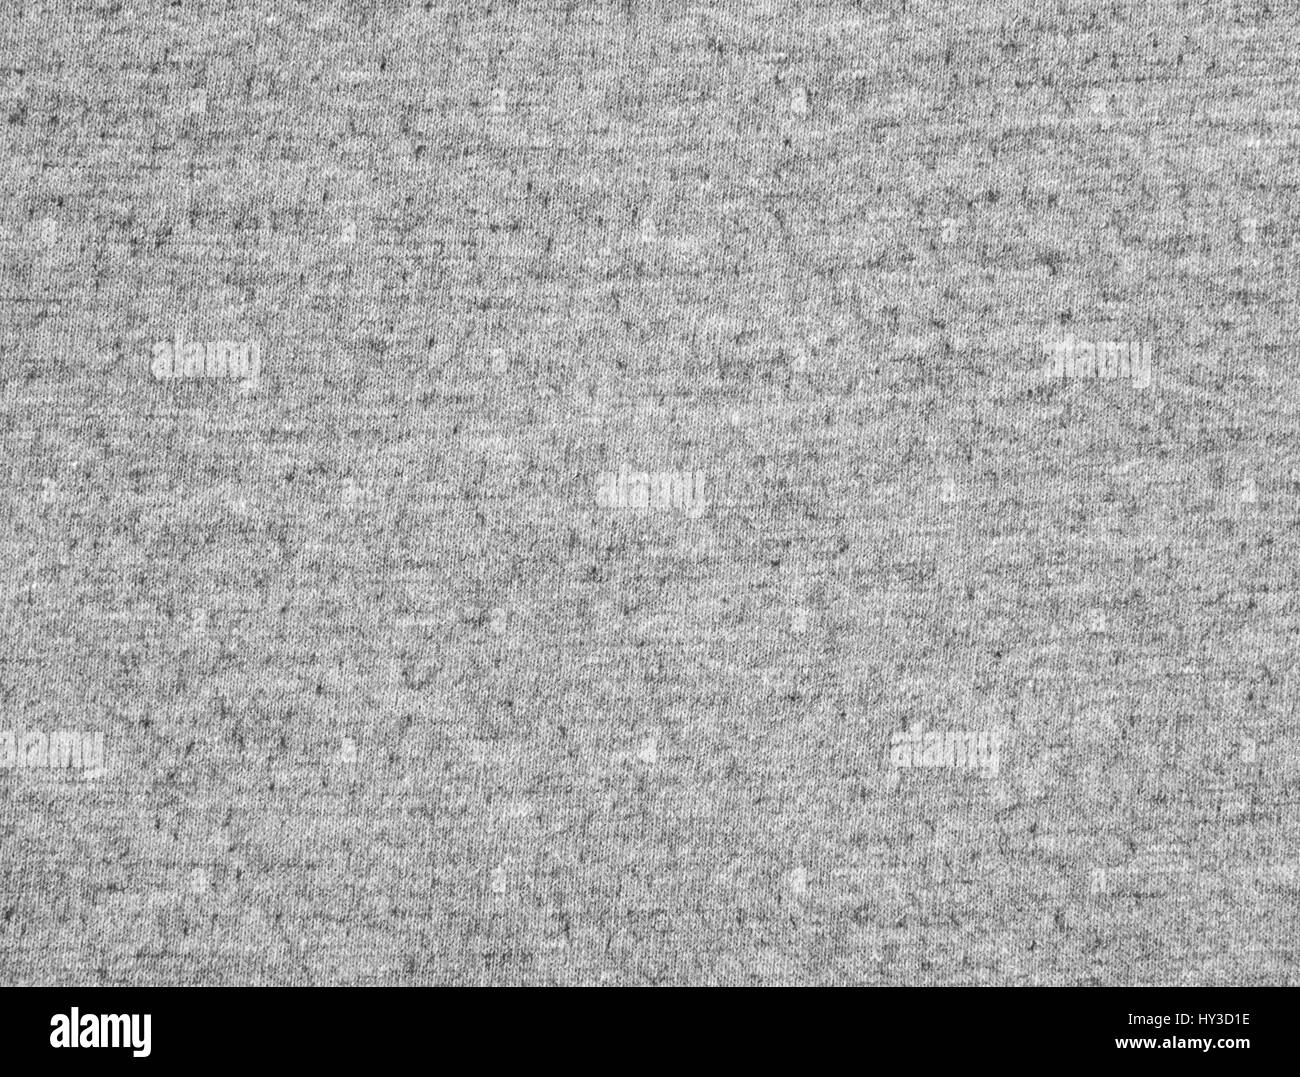 Fabric Texture Black And White Stock Photos Images Alamy